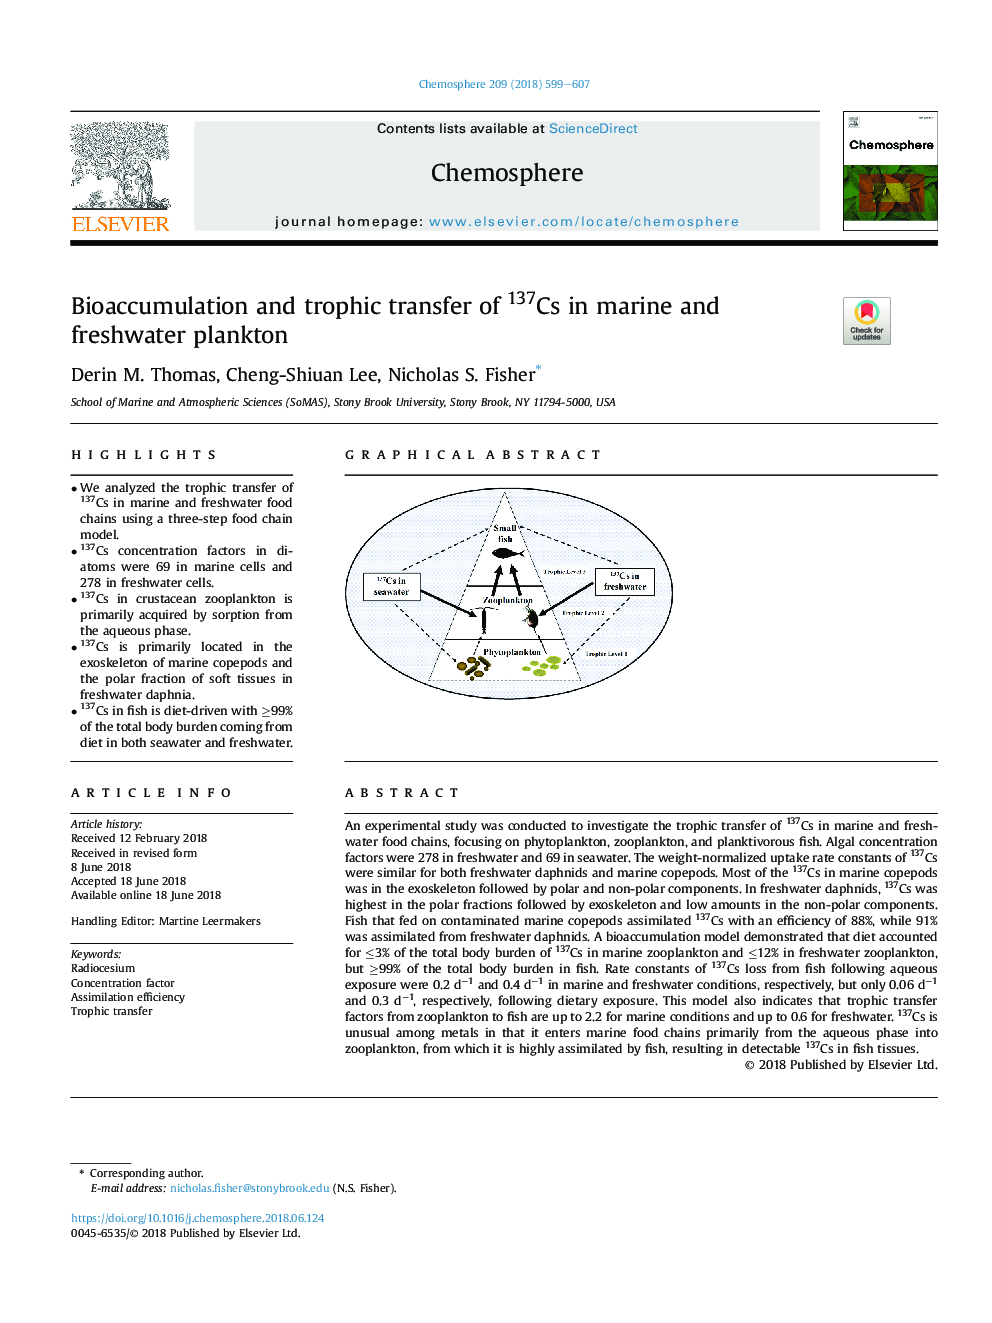 Bioaccumulation and trophic transfer of 137Cs in marine and freshwater plankton